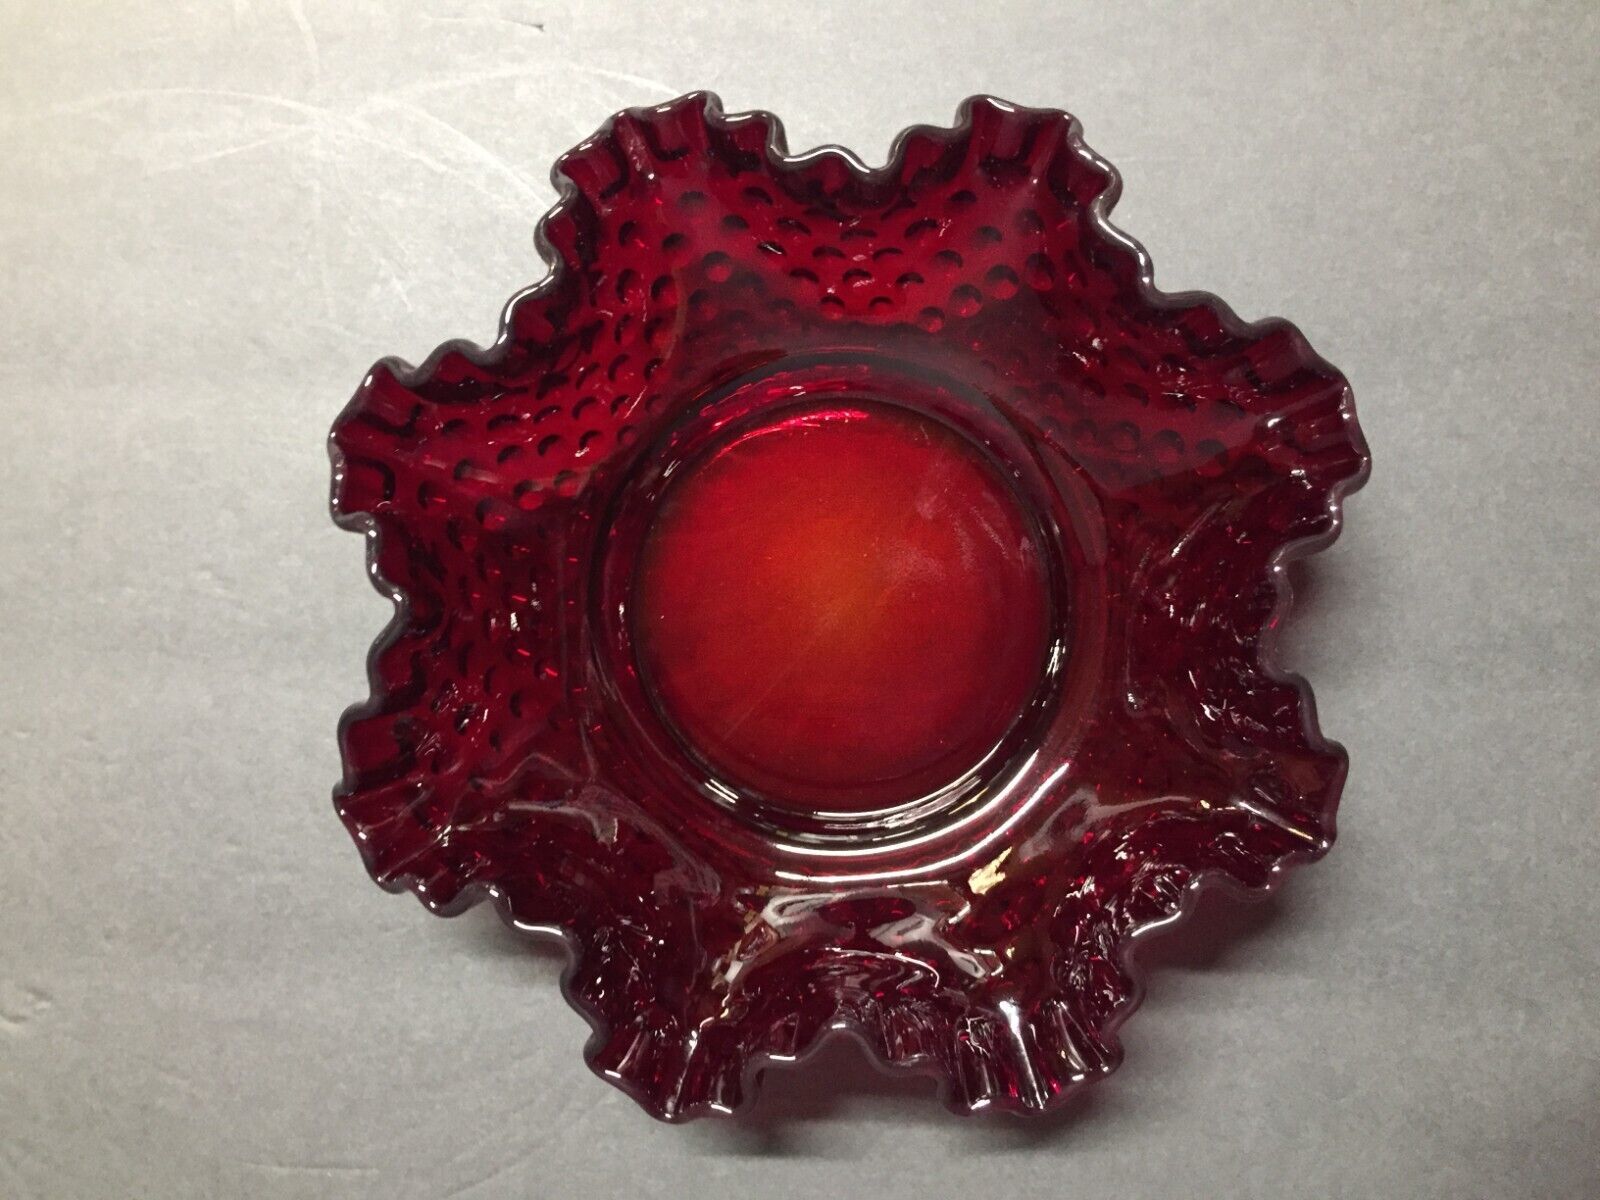 Vintage Fenton Ruby Red Candy or Nut Dish Bowl Ruffled Hobnail Crimped Cranberry - $28.39